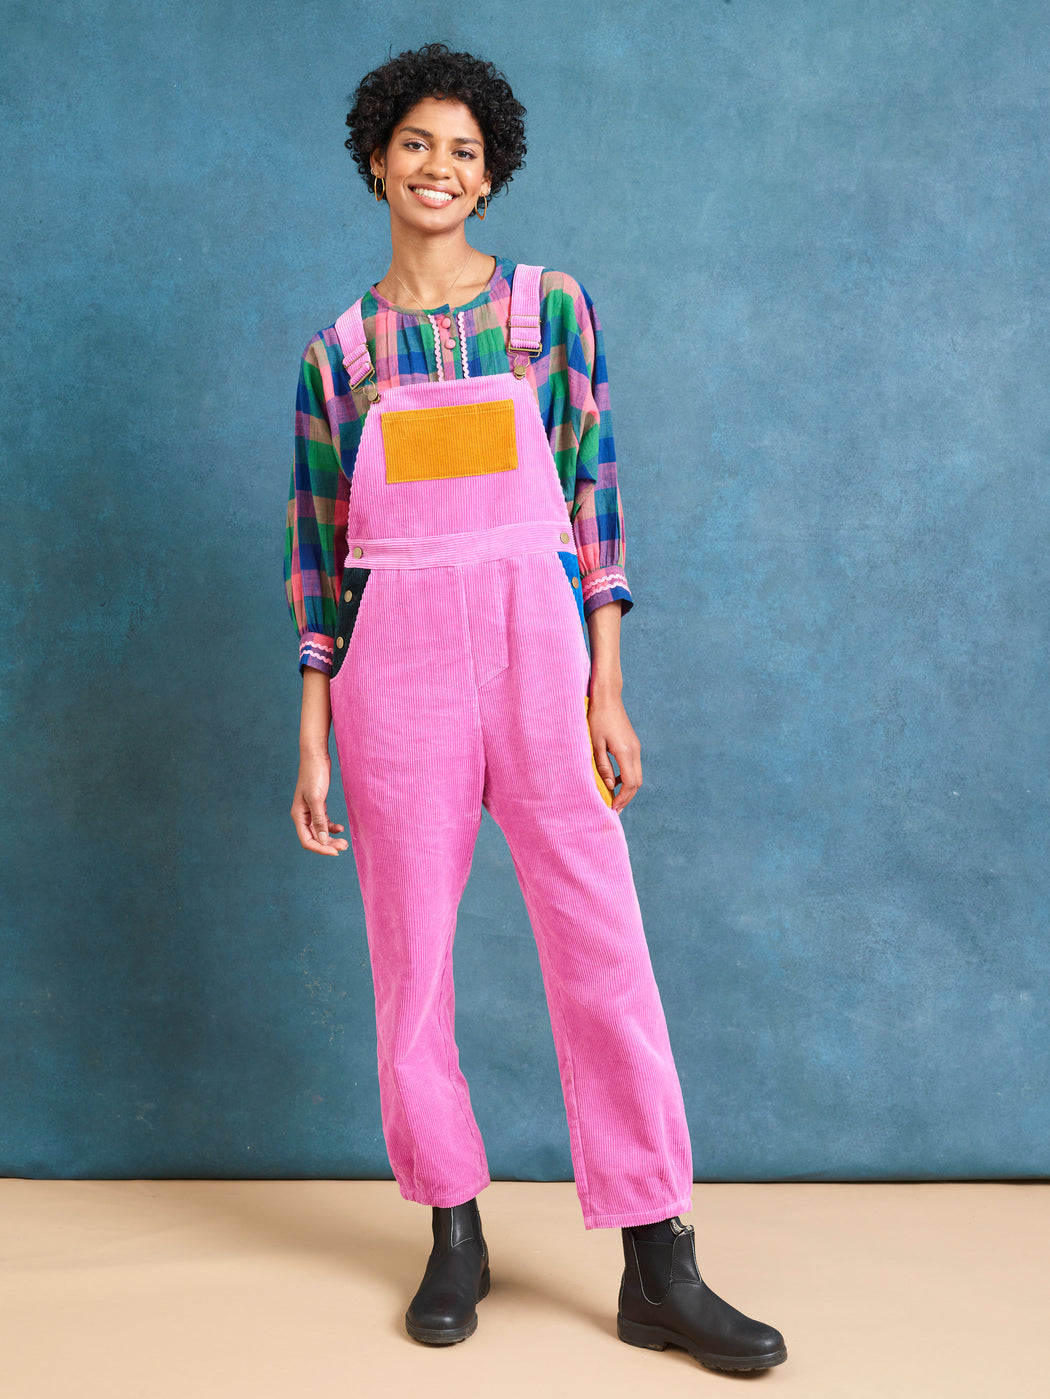 Lowie Pink Colourblock Dungarees